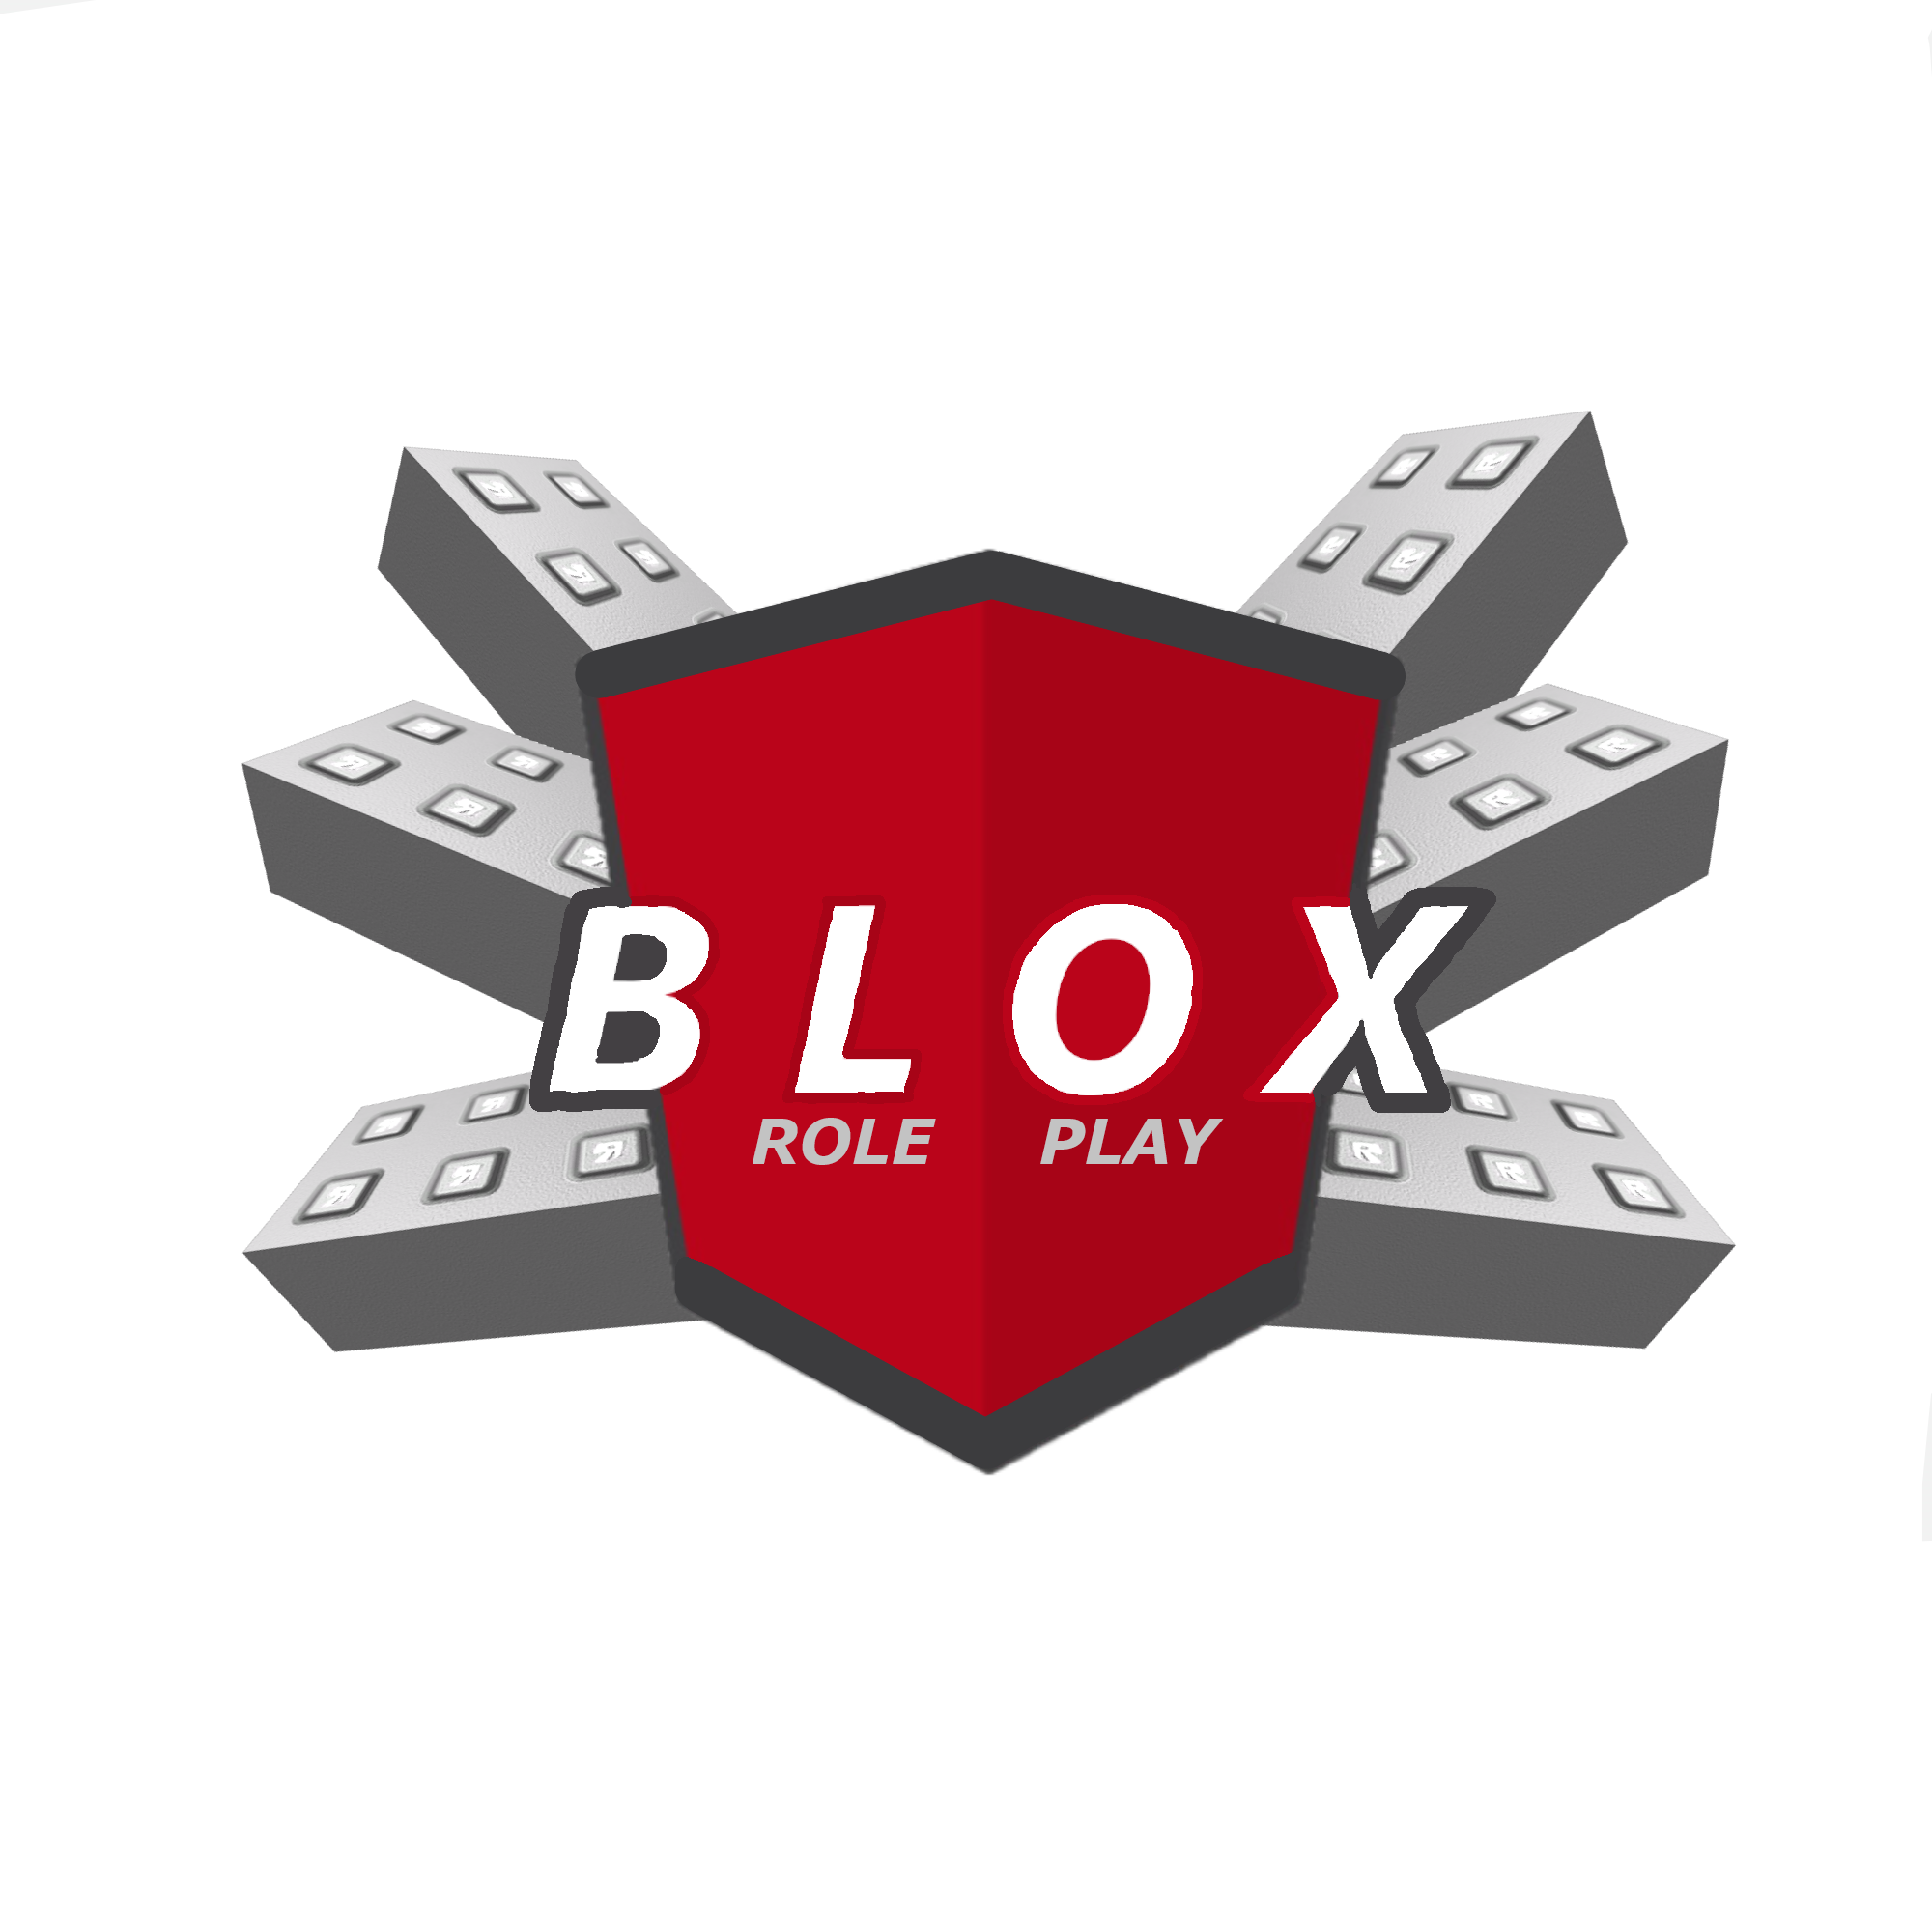 Blox Roleplay rendition image